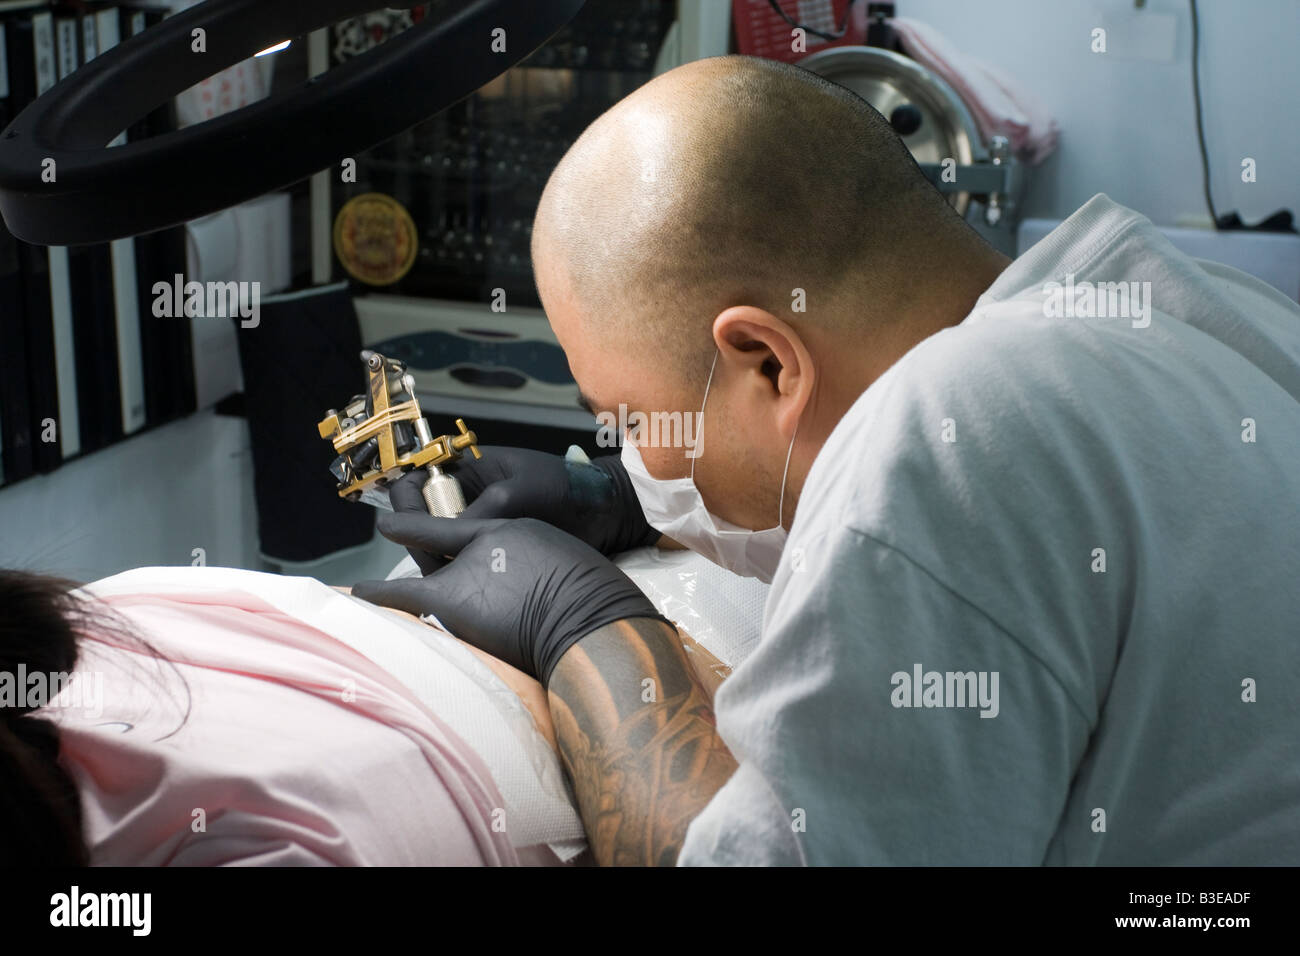 Young female Taiwanese Chinese receiving lower back tattoo from Asian male with shaved head, Taipei Taiwan Republic of China ROC Stock Photo